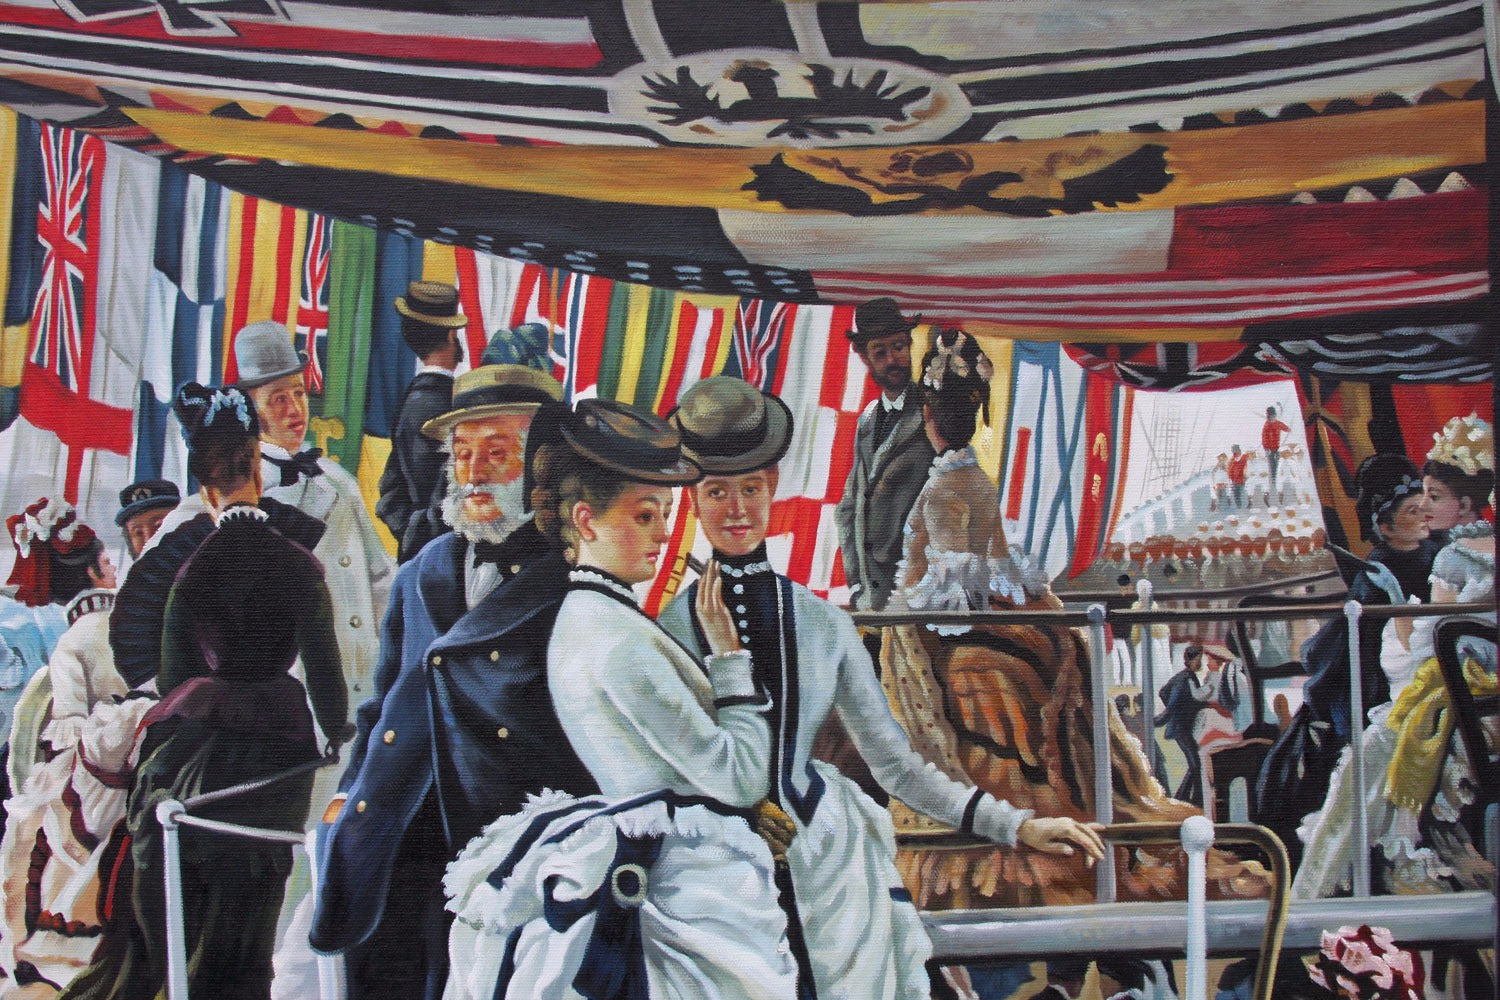 Oil Painting after 'The Ball On Shipboard' in style of James Tissot